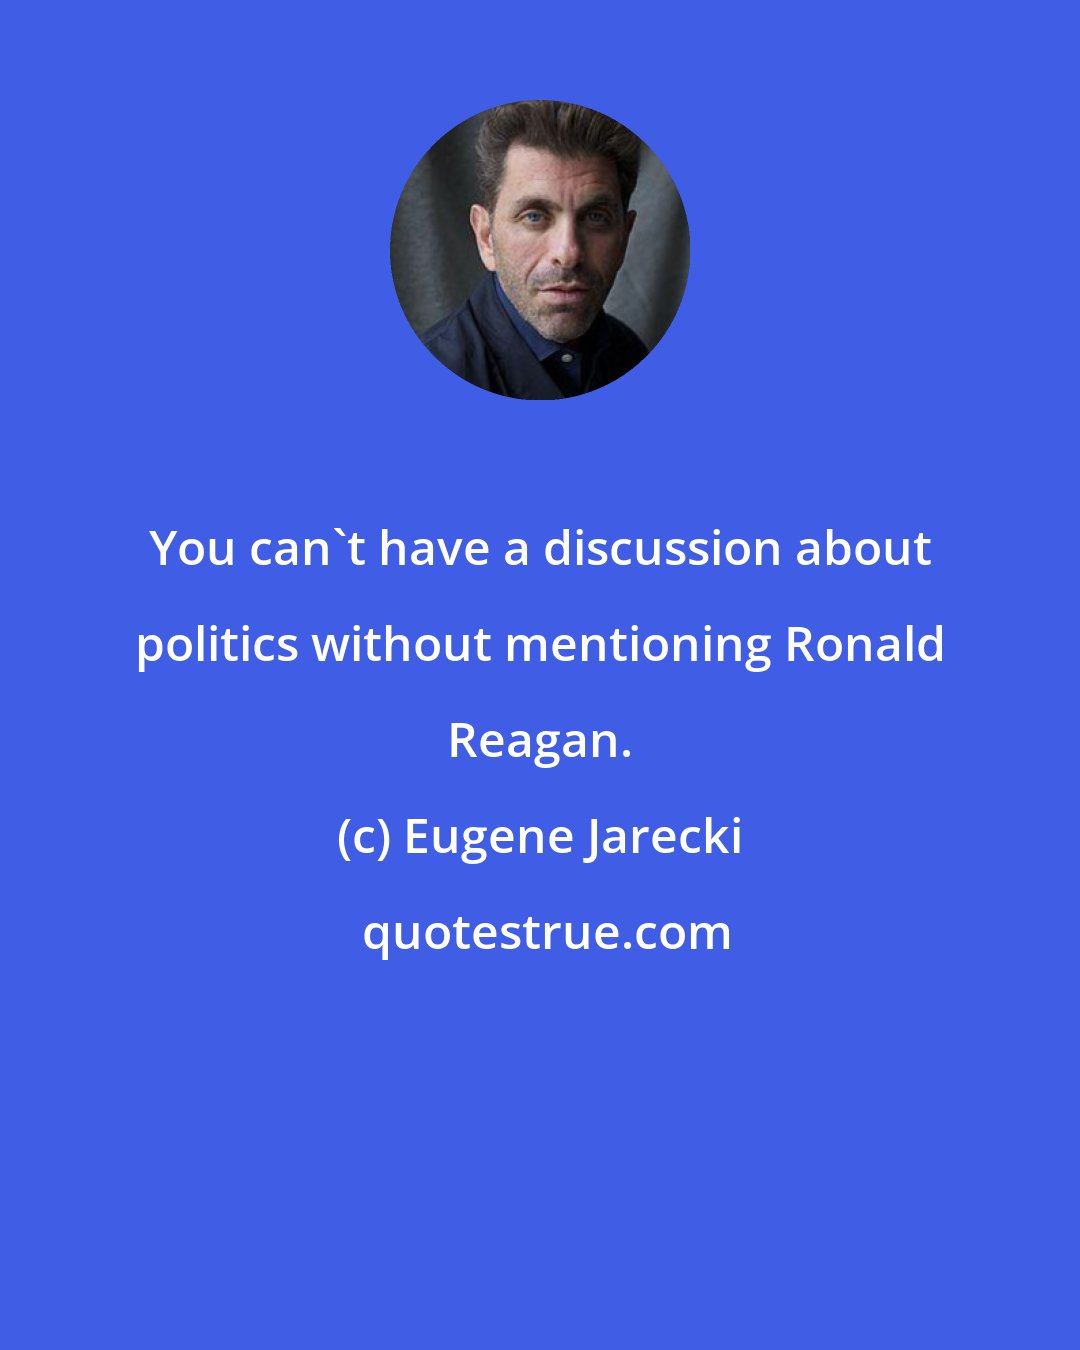 Eugene Jarecki: You can't have a discussion about politics without mentioning Ronald Reagan.